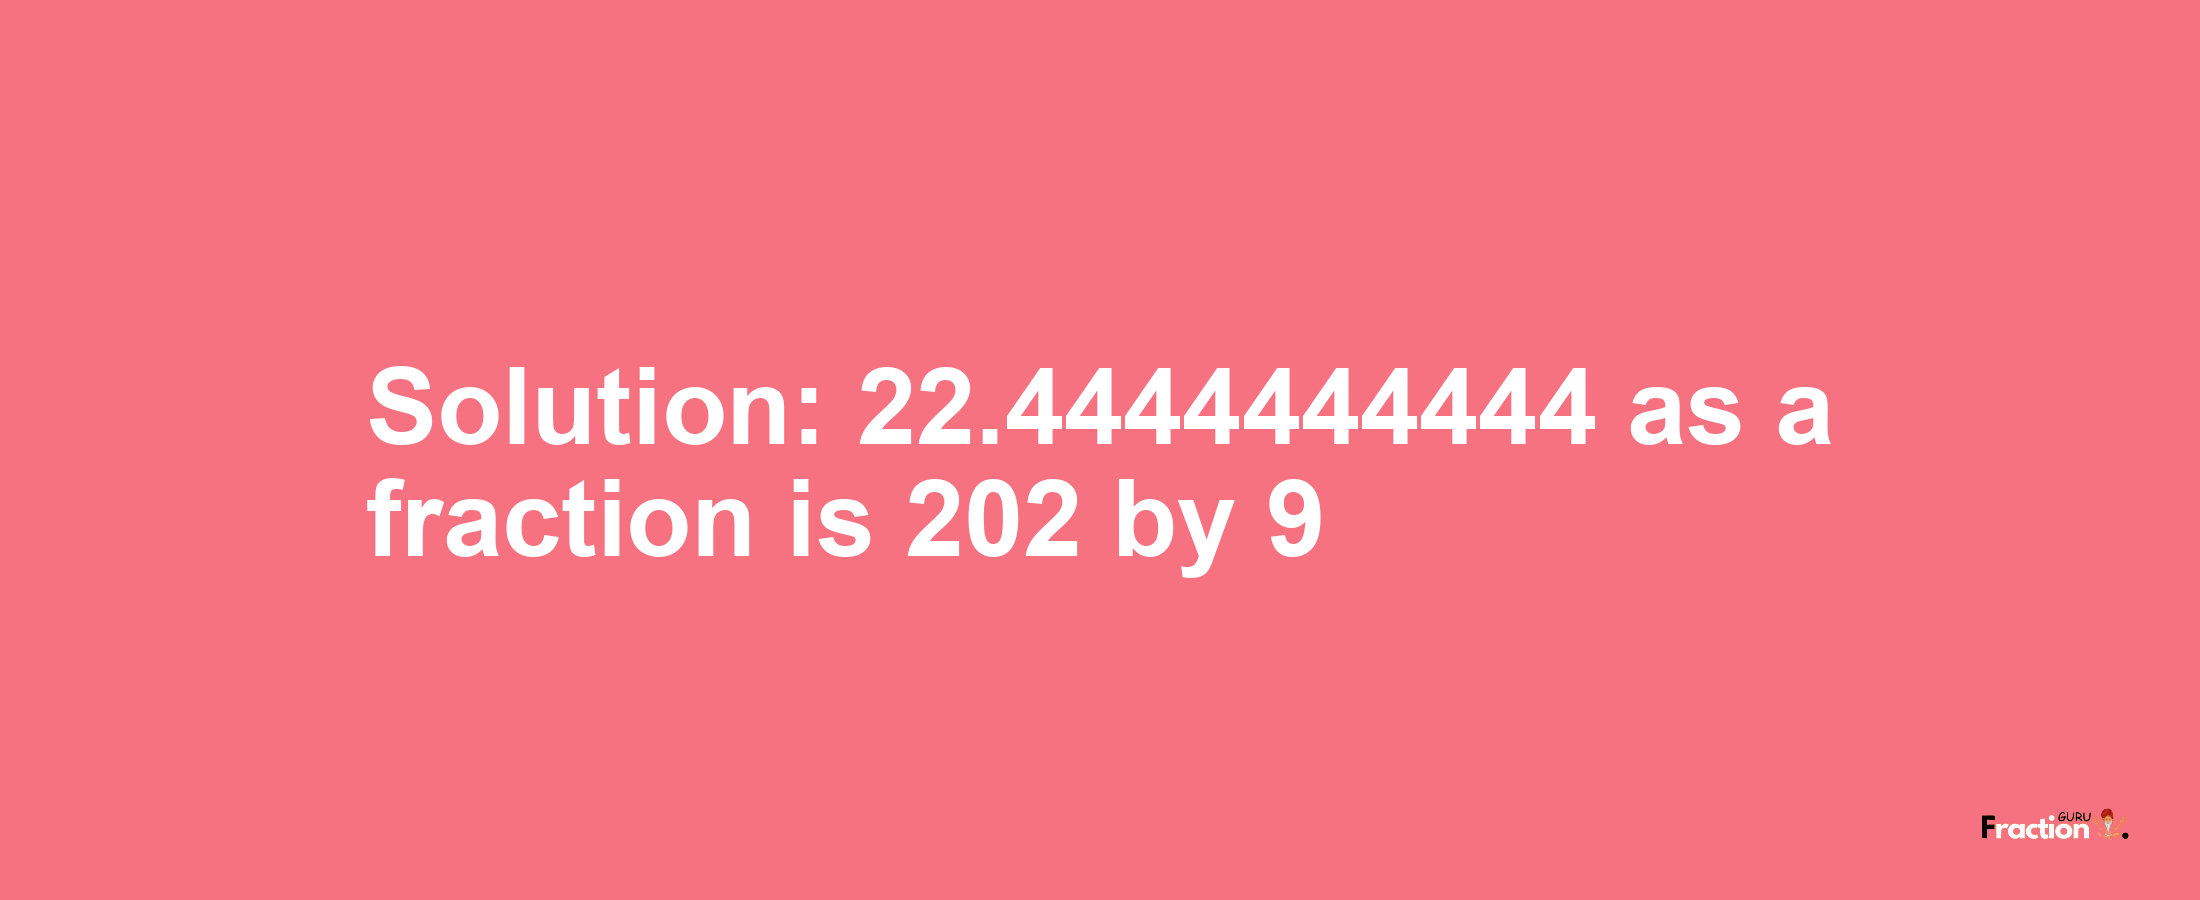 Solution:22.4444444444 as a fraction is 202/9